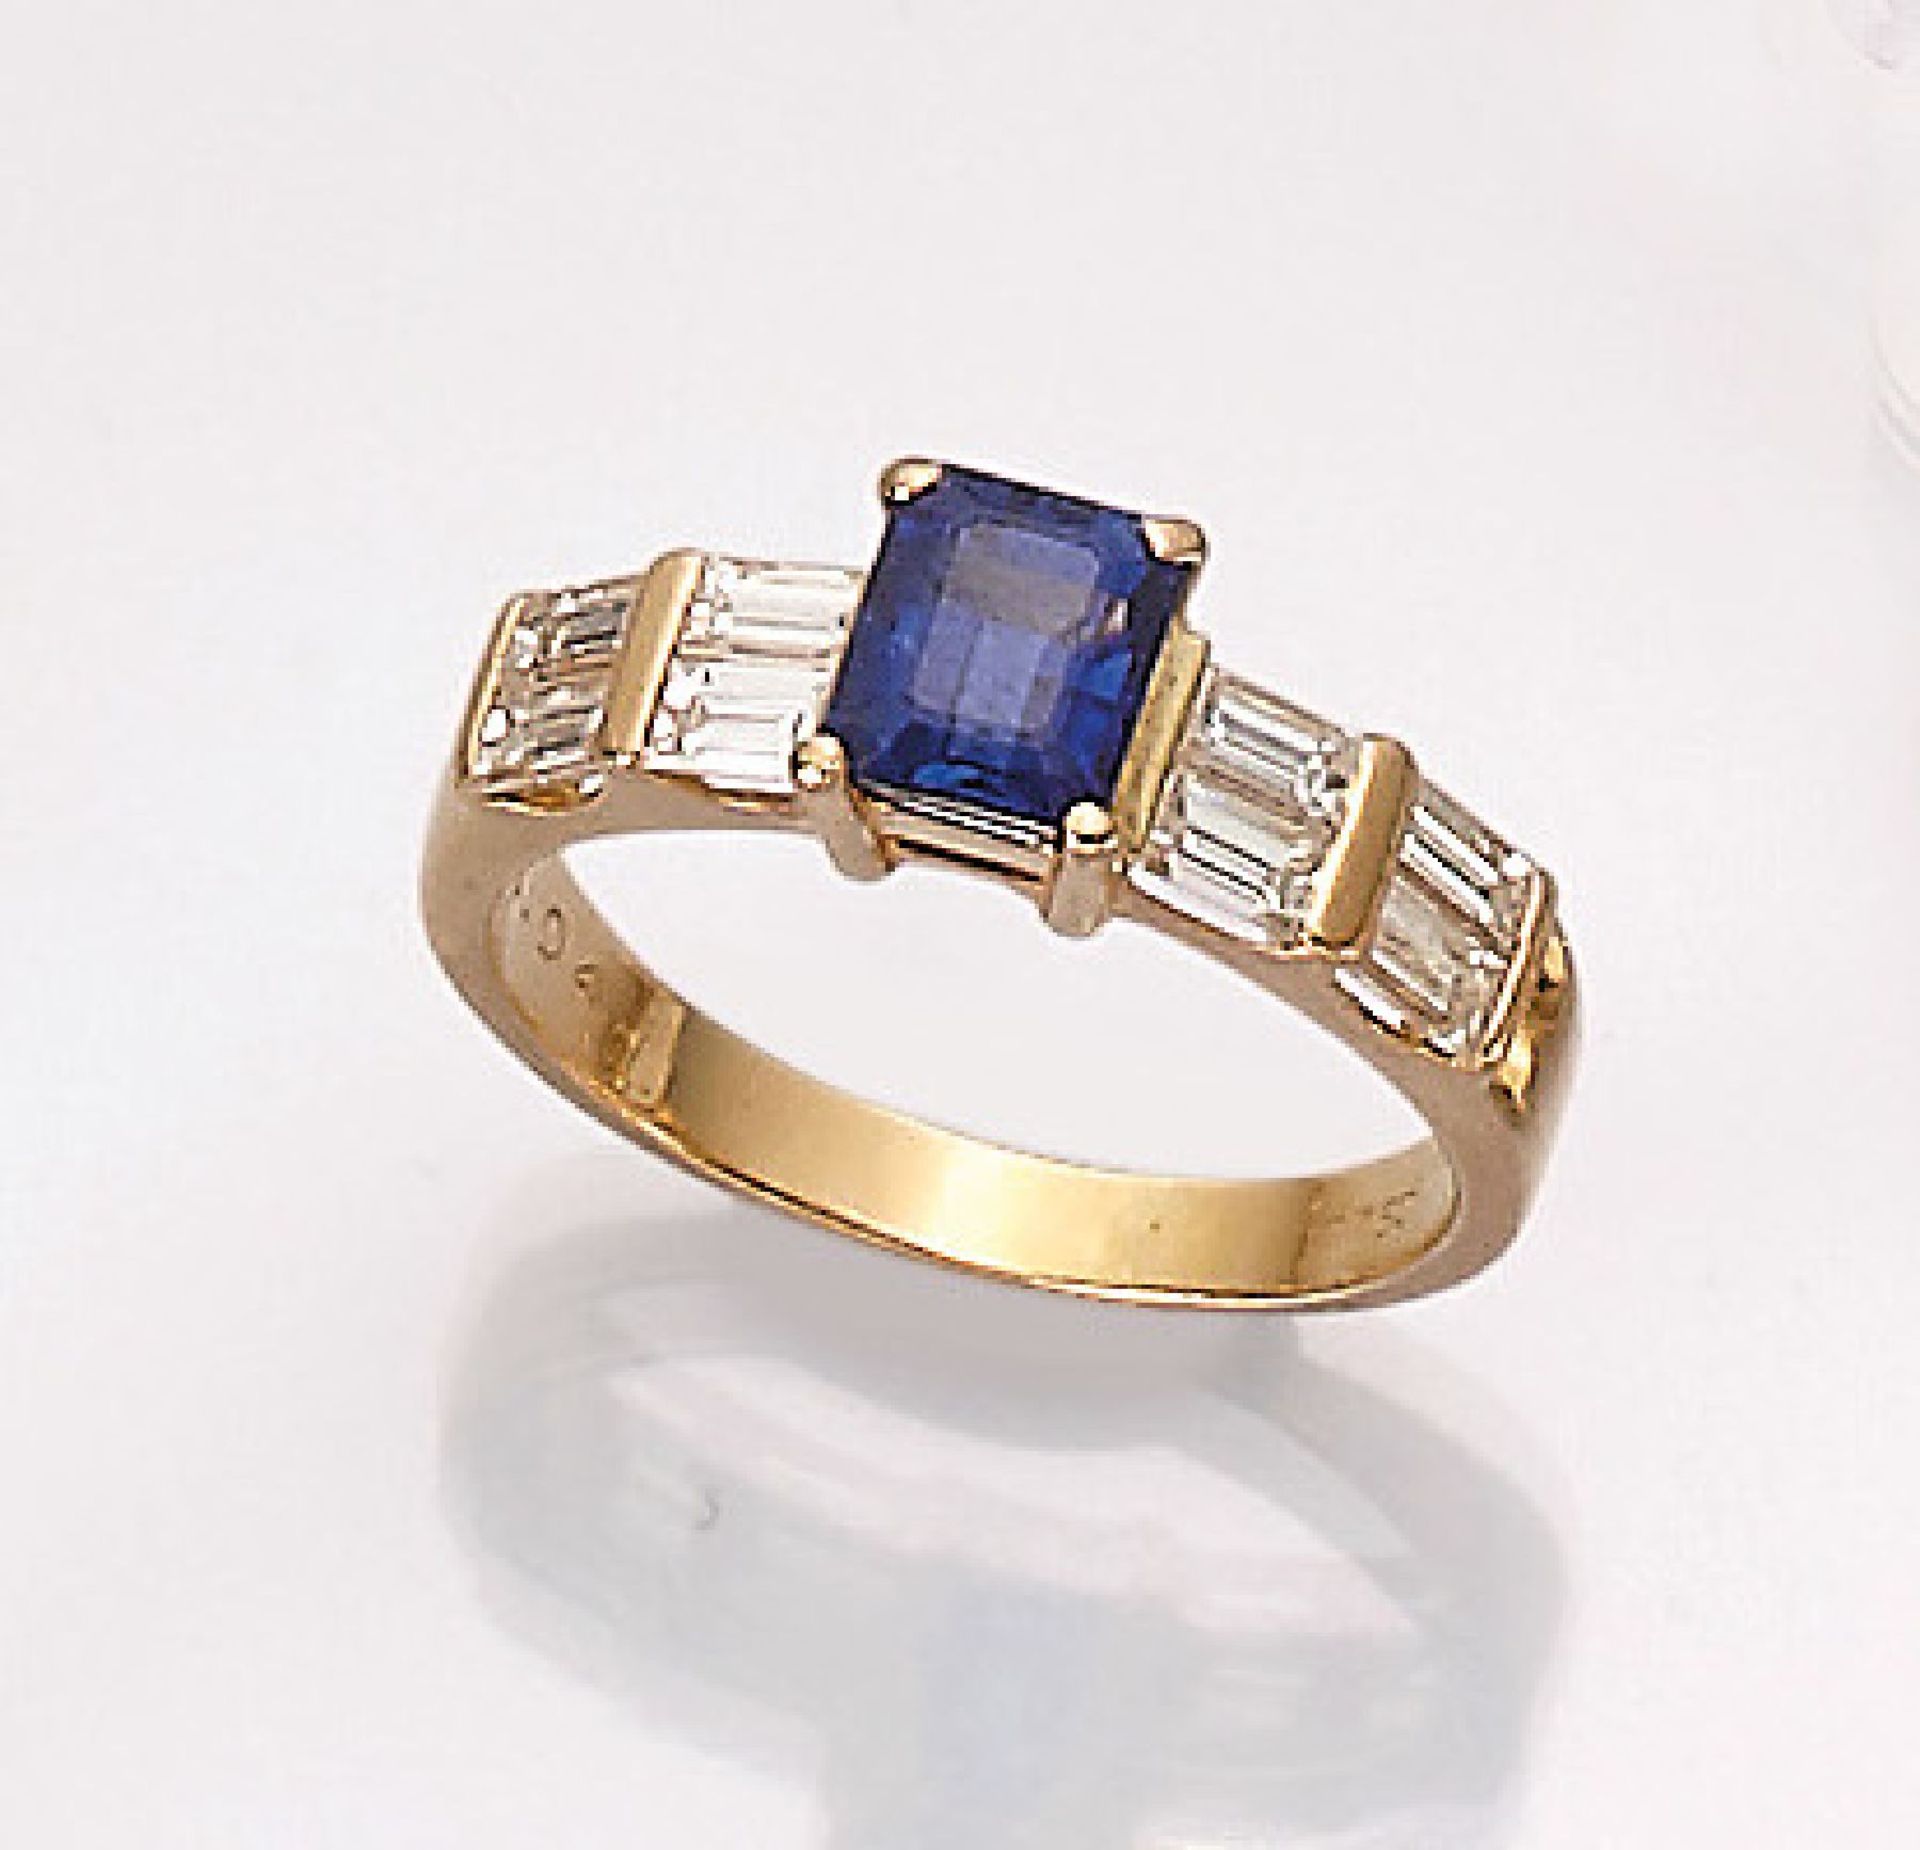 18 kt gold ring with sapphire and diamonds ,YG 750/000, Emerald Cut sapphire approx. 1.04 ct, fine